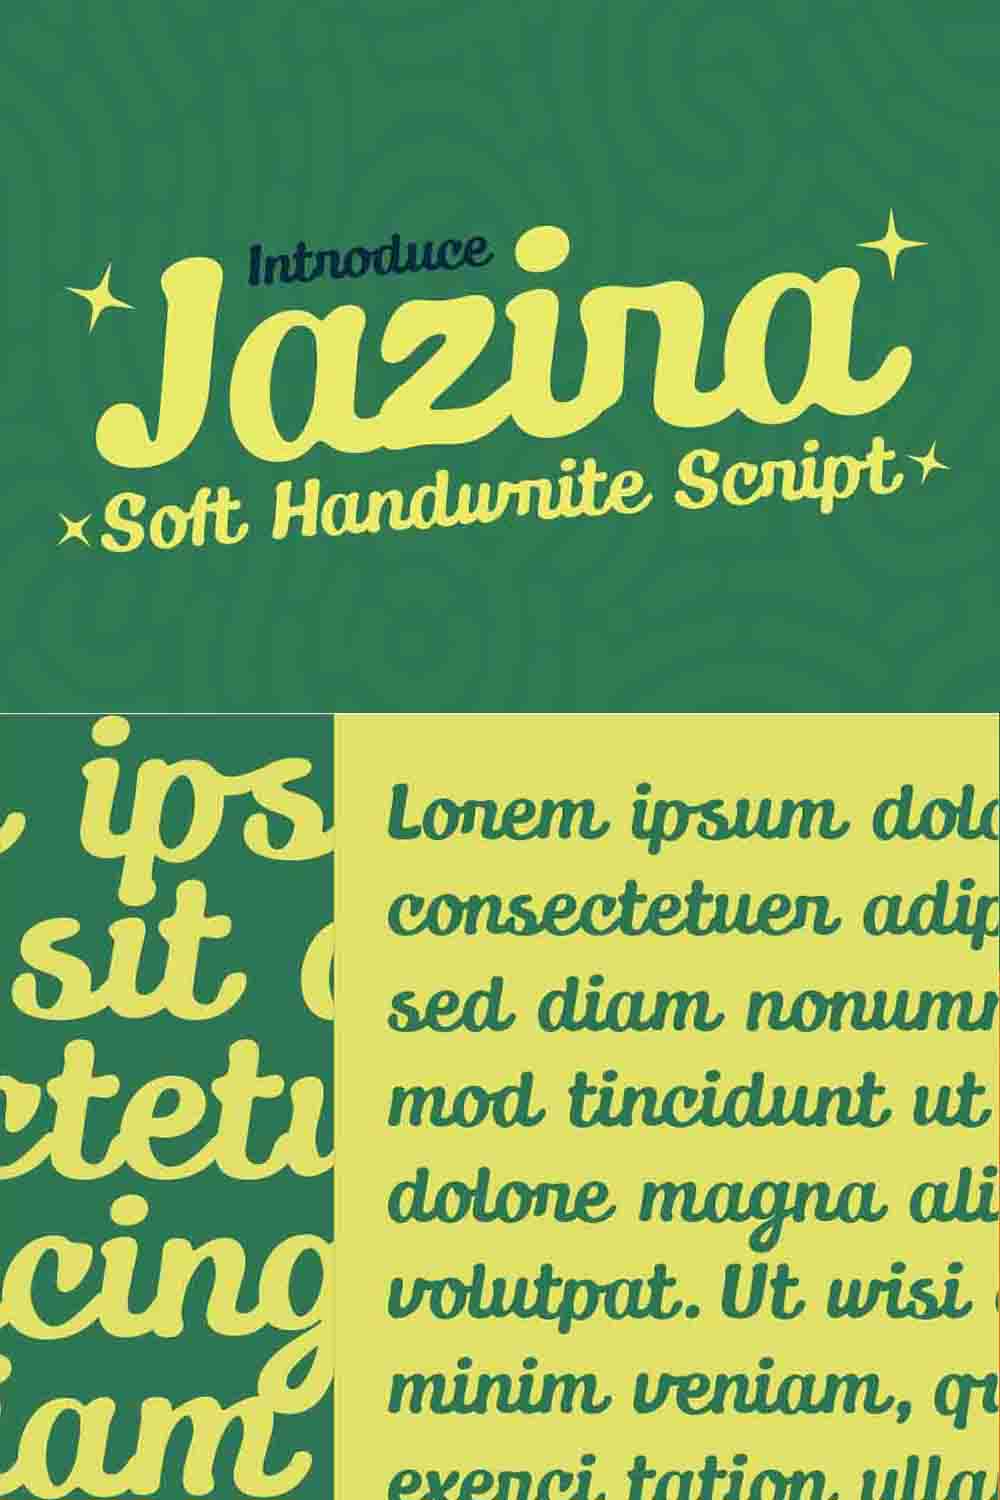 Text in Jazira font on a green background.